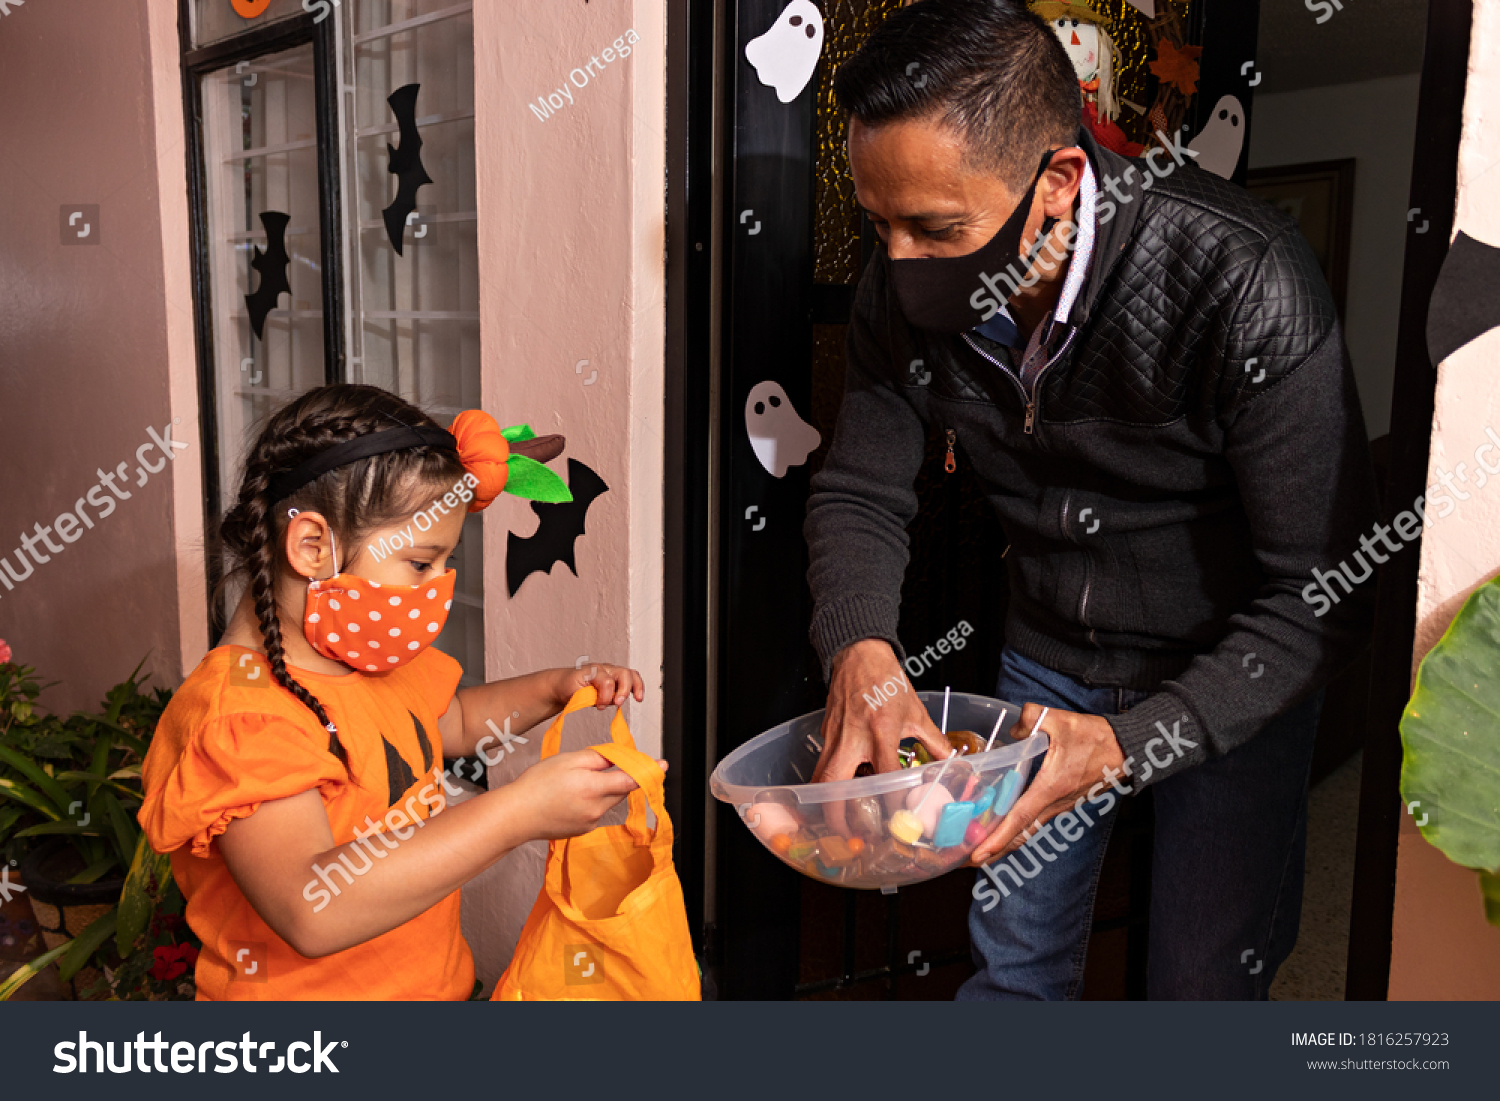 A man giving candies to a girl dressed in a pumpkin costume in the night of halloween #1816257923